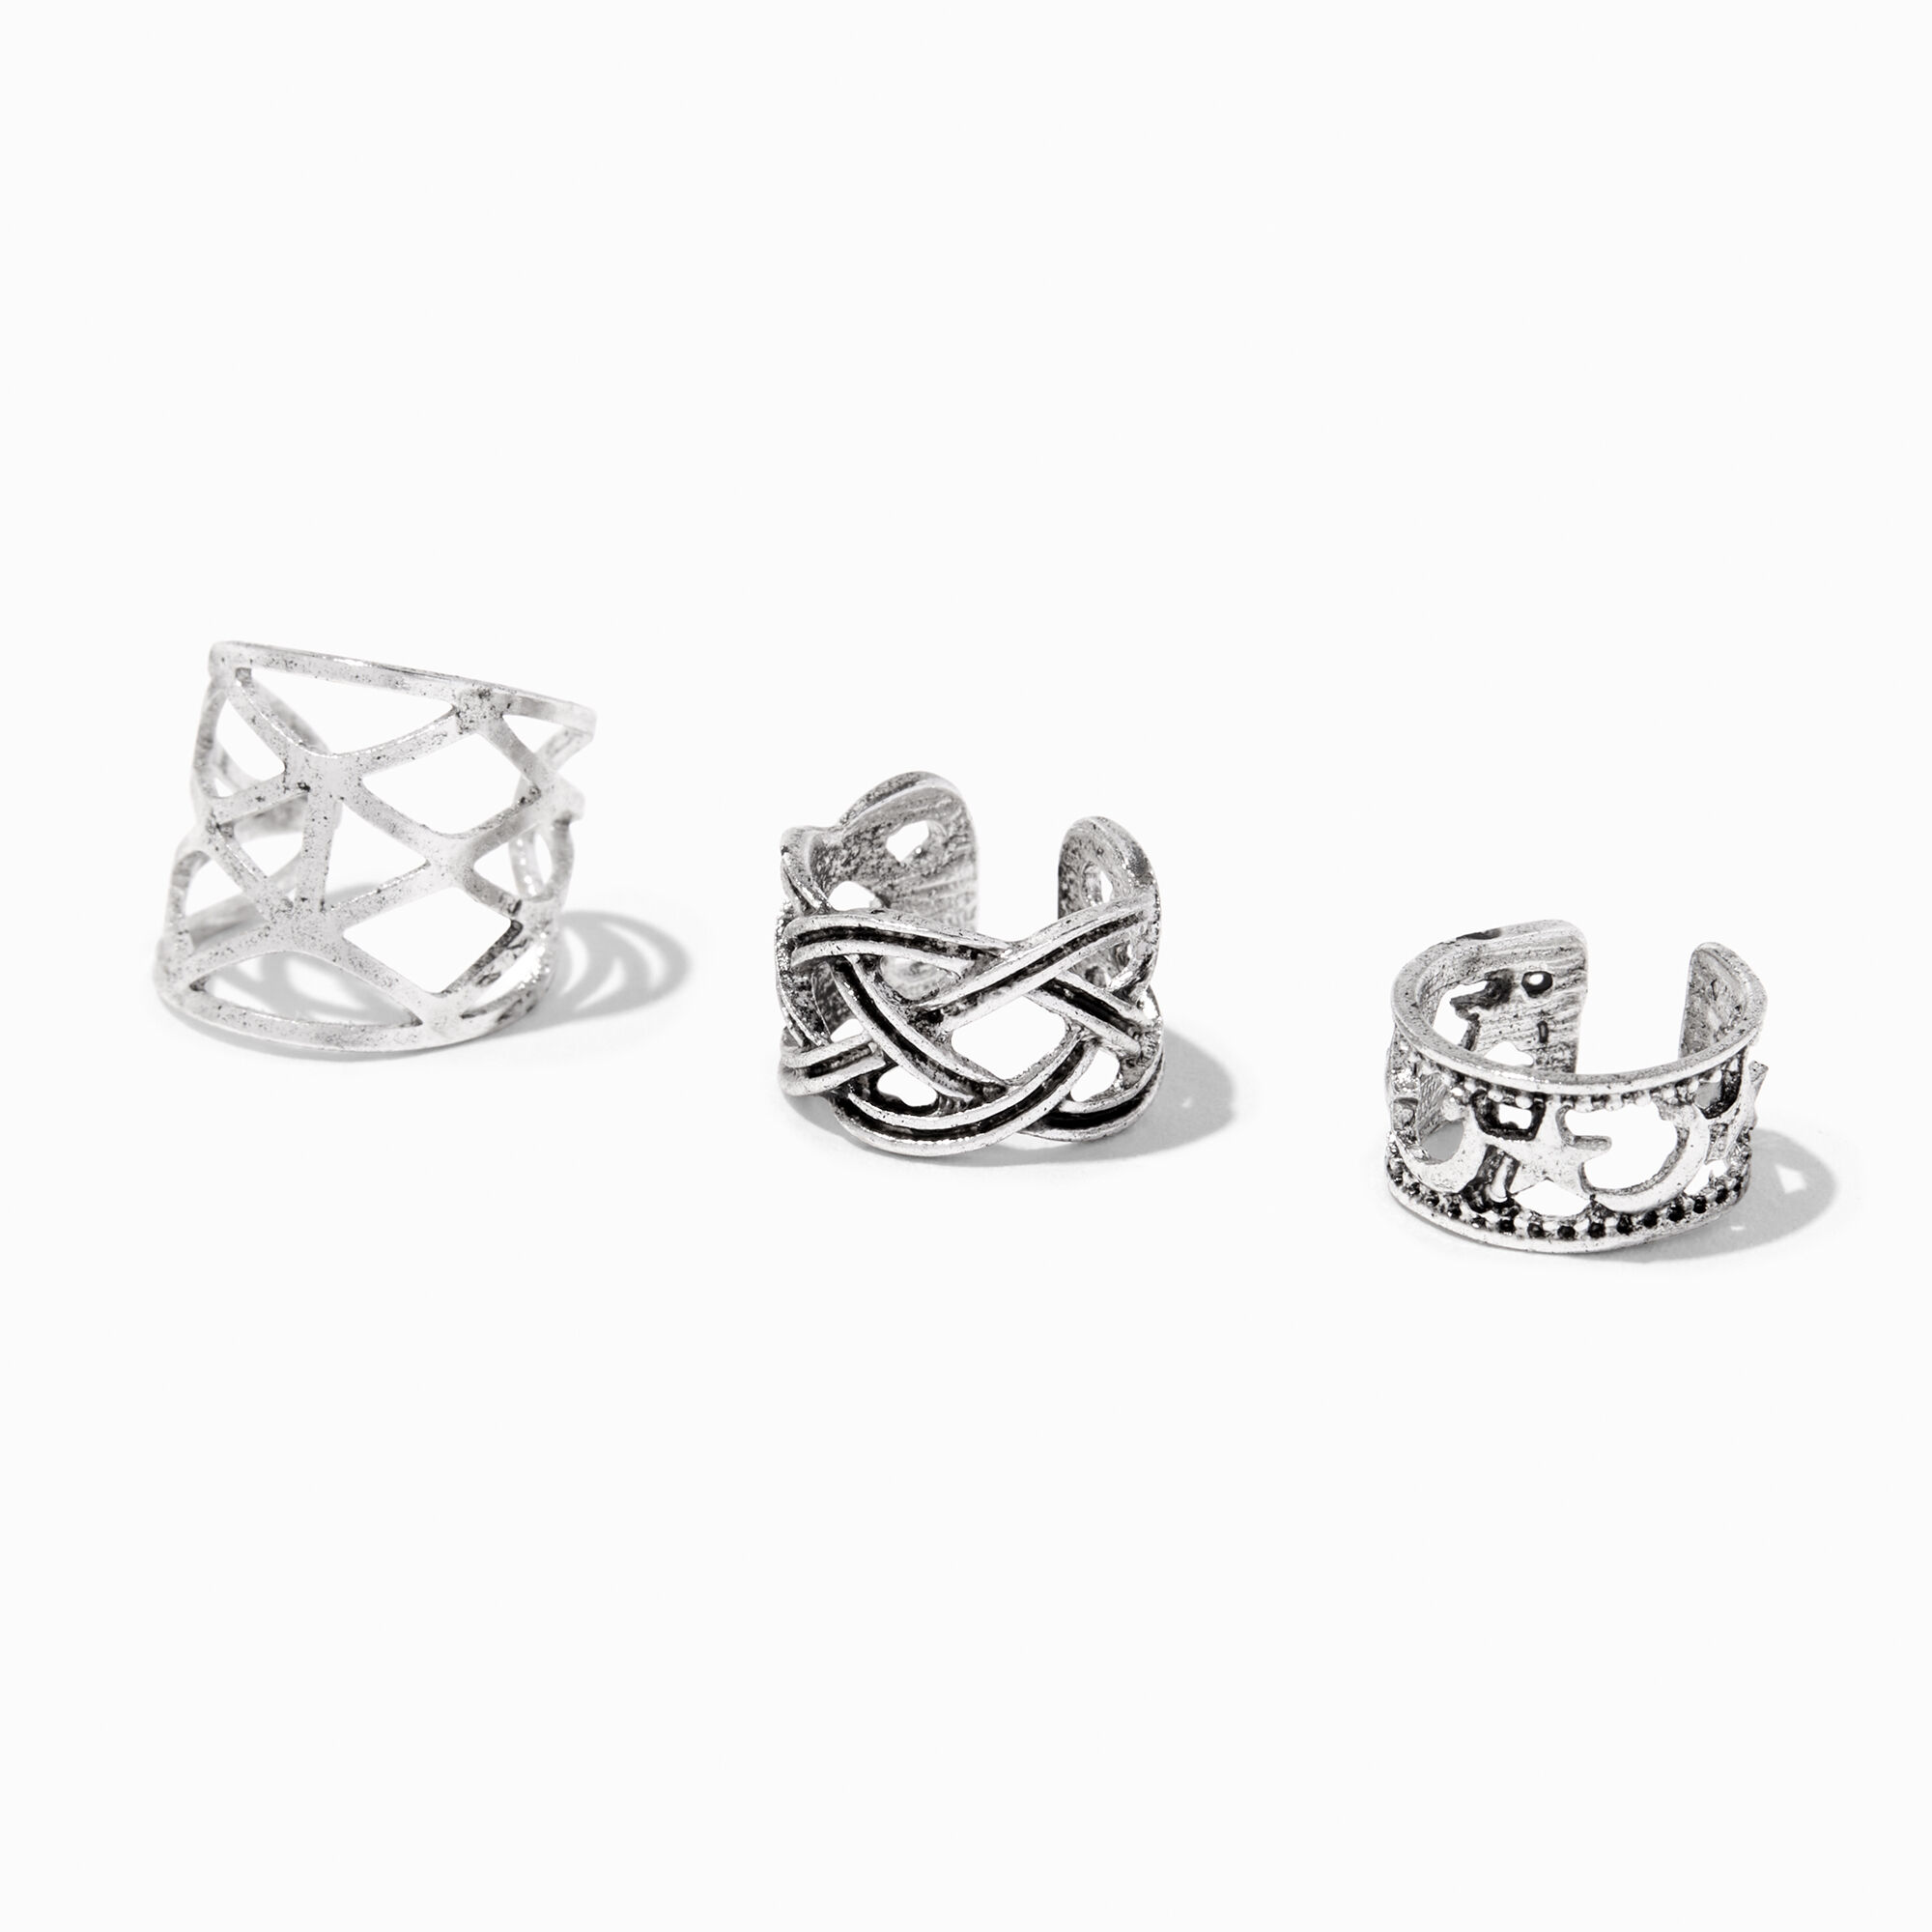 View Claires Antique Tone Ear Cuffs 3 Pack Silver information